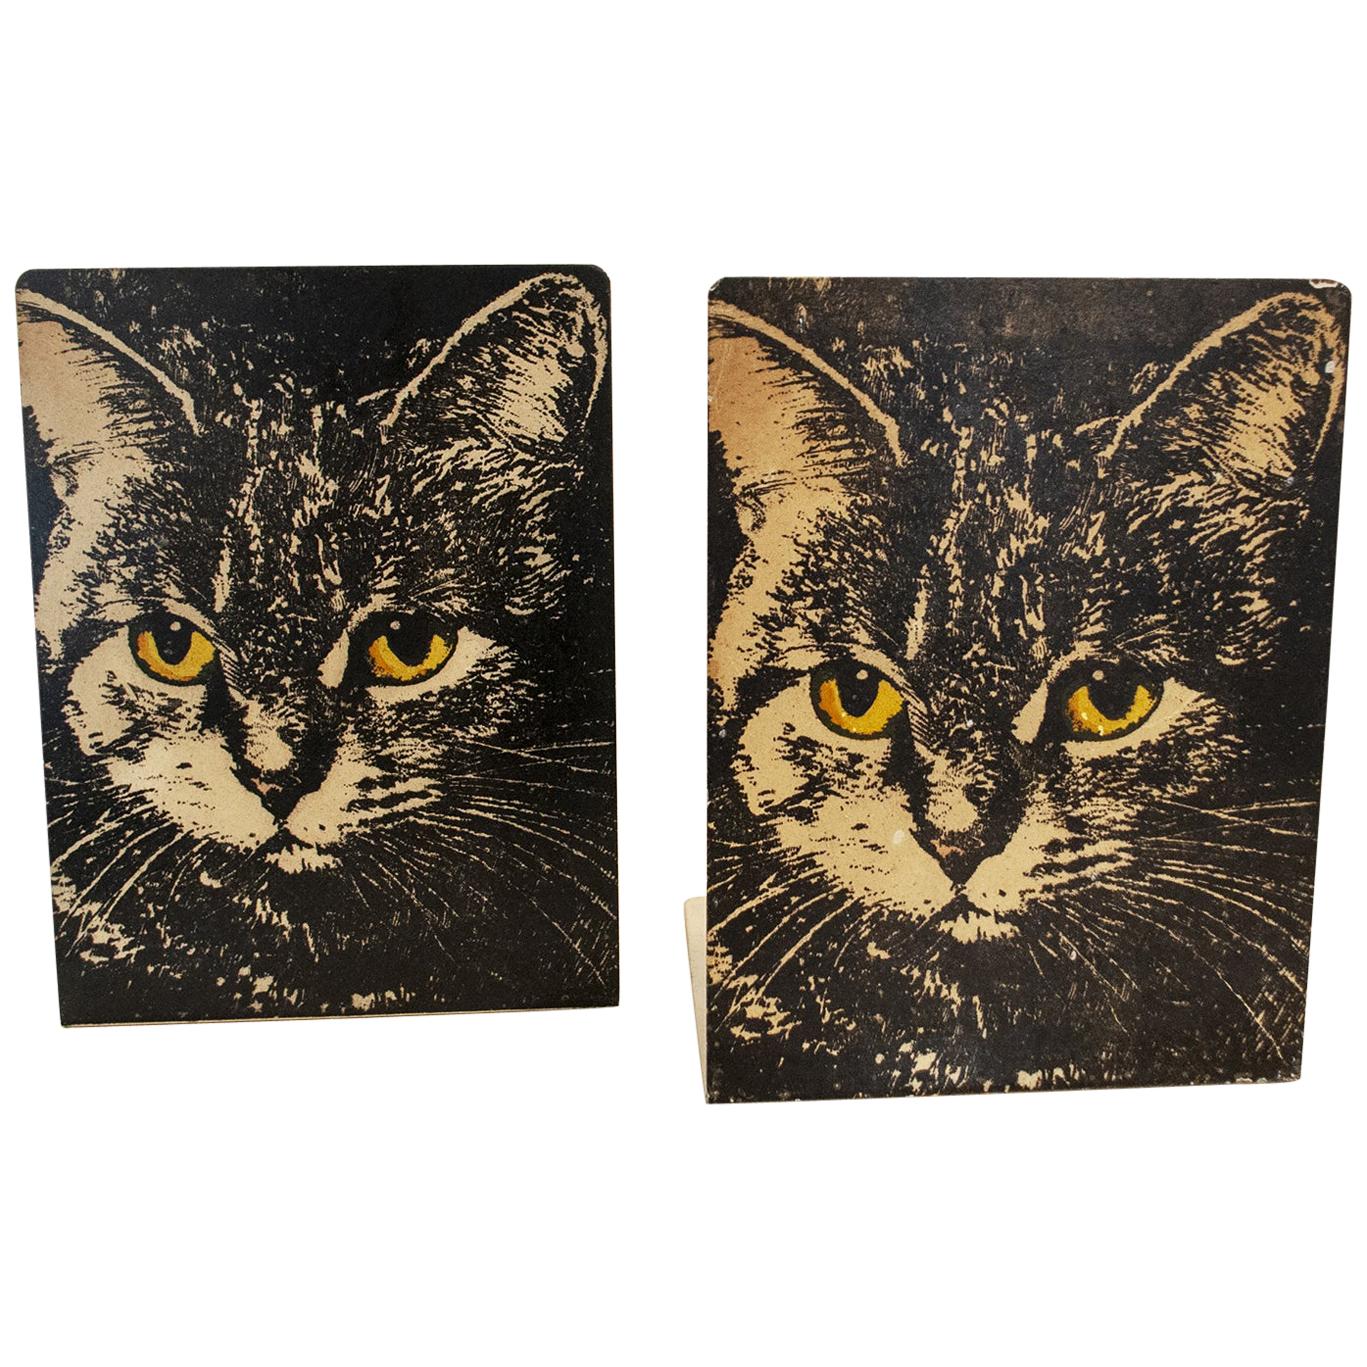 Pair of Vintage Bookends by Fornasetti for Atelier Fornasetti, 1960s For Sale